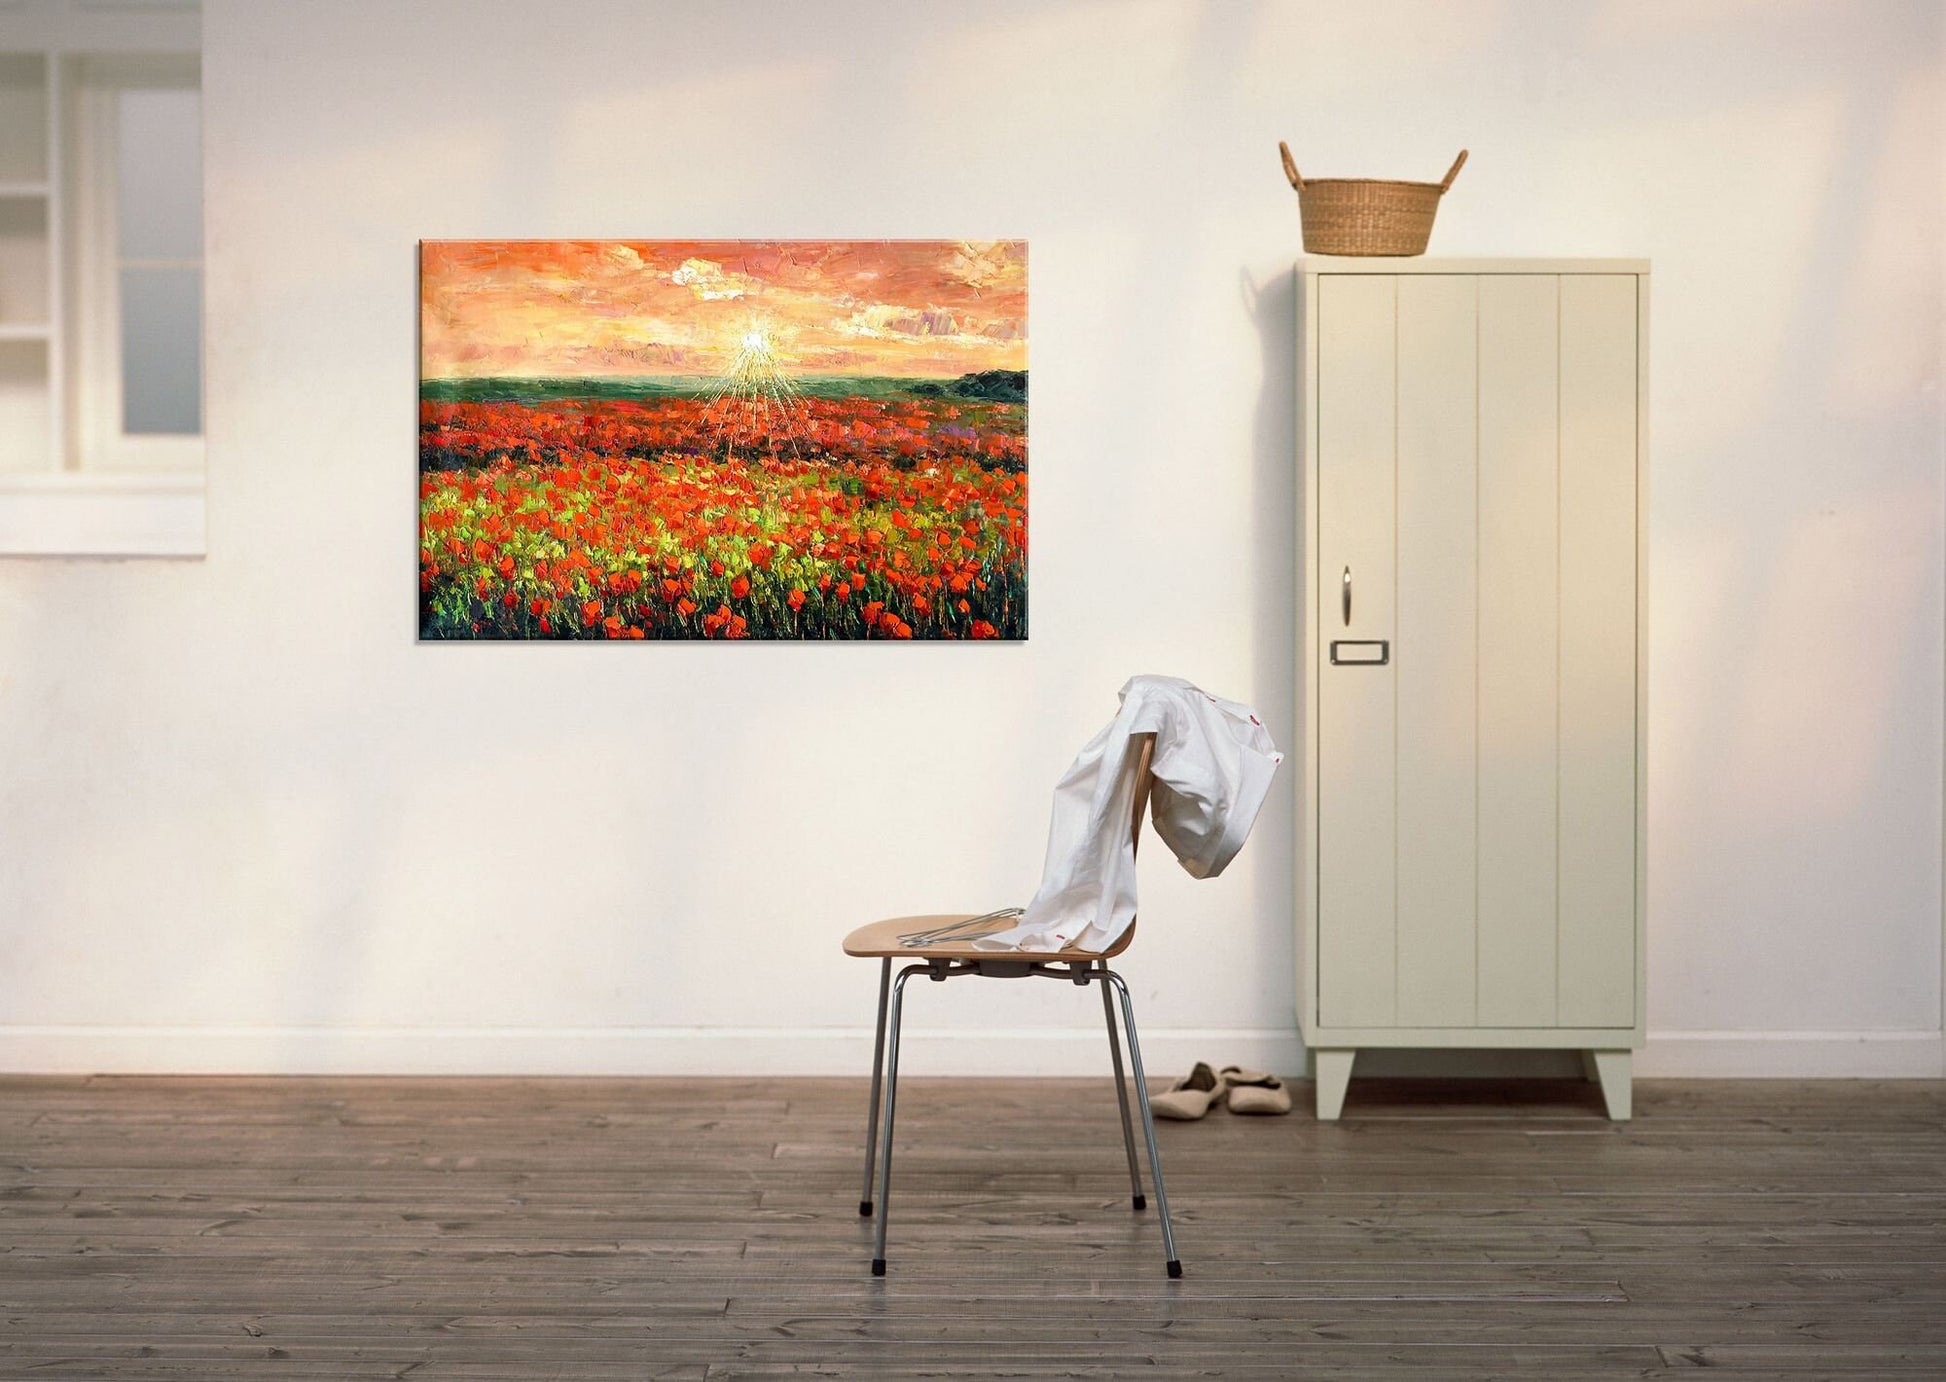 Large Landscape Oil Painting Poppy Fields at Dawn, Original Artwork, Canvas Painting, Canvas Wall Decor, Large Painting, Kitchen Wall Art